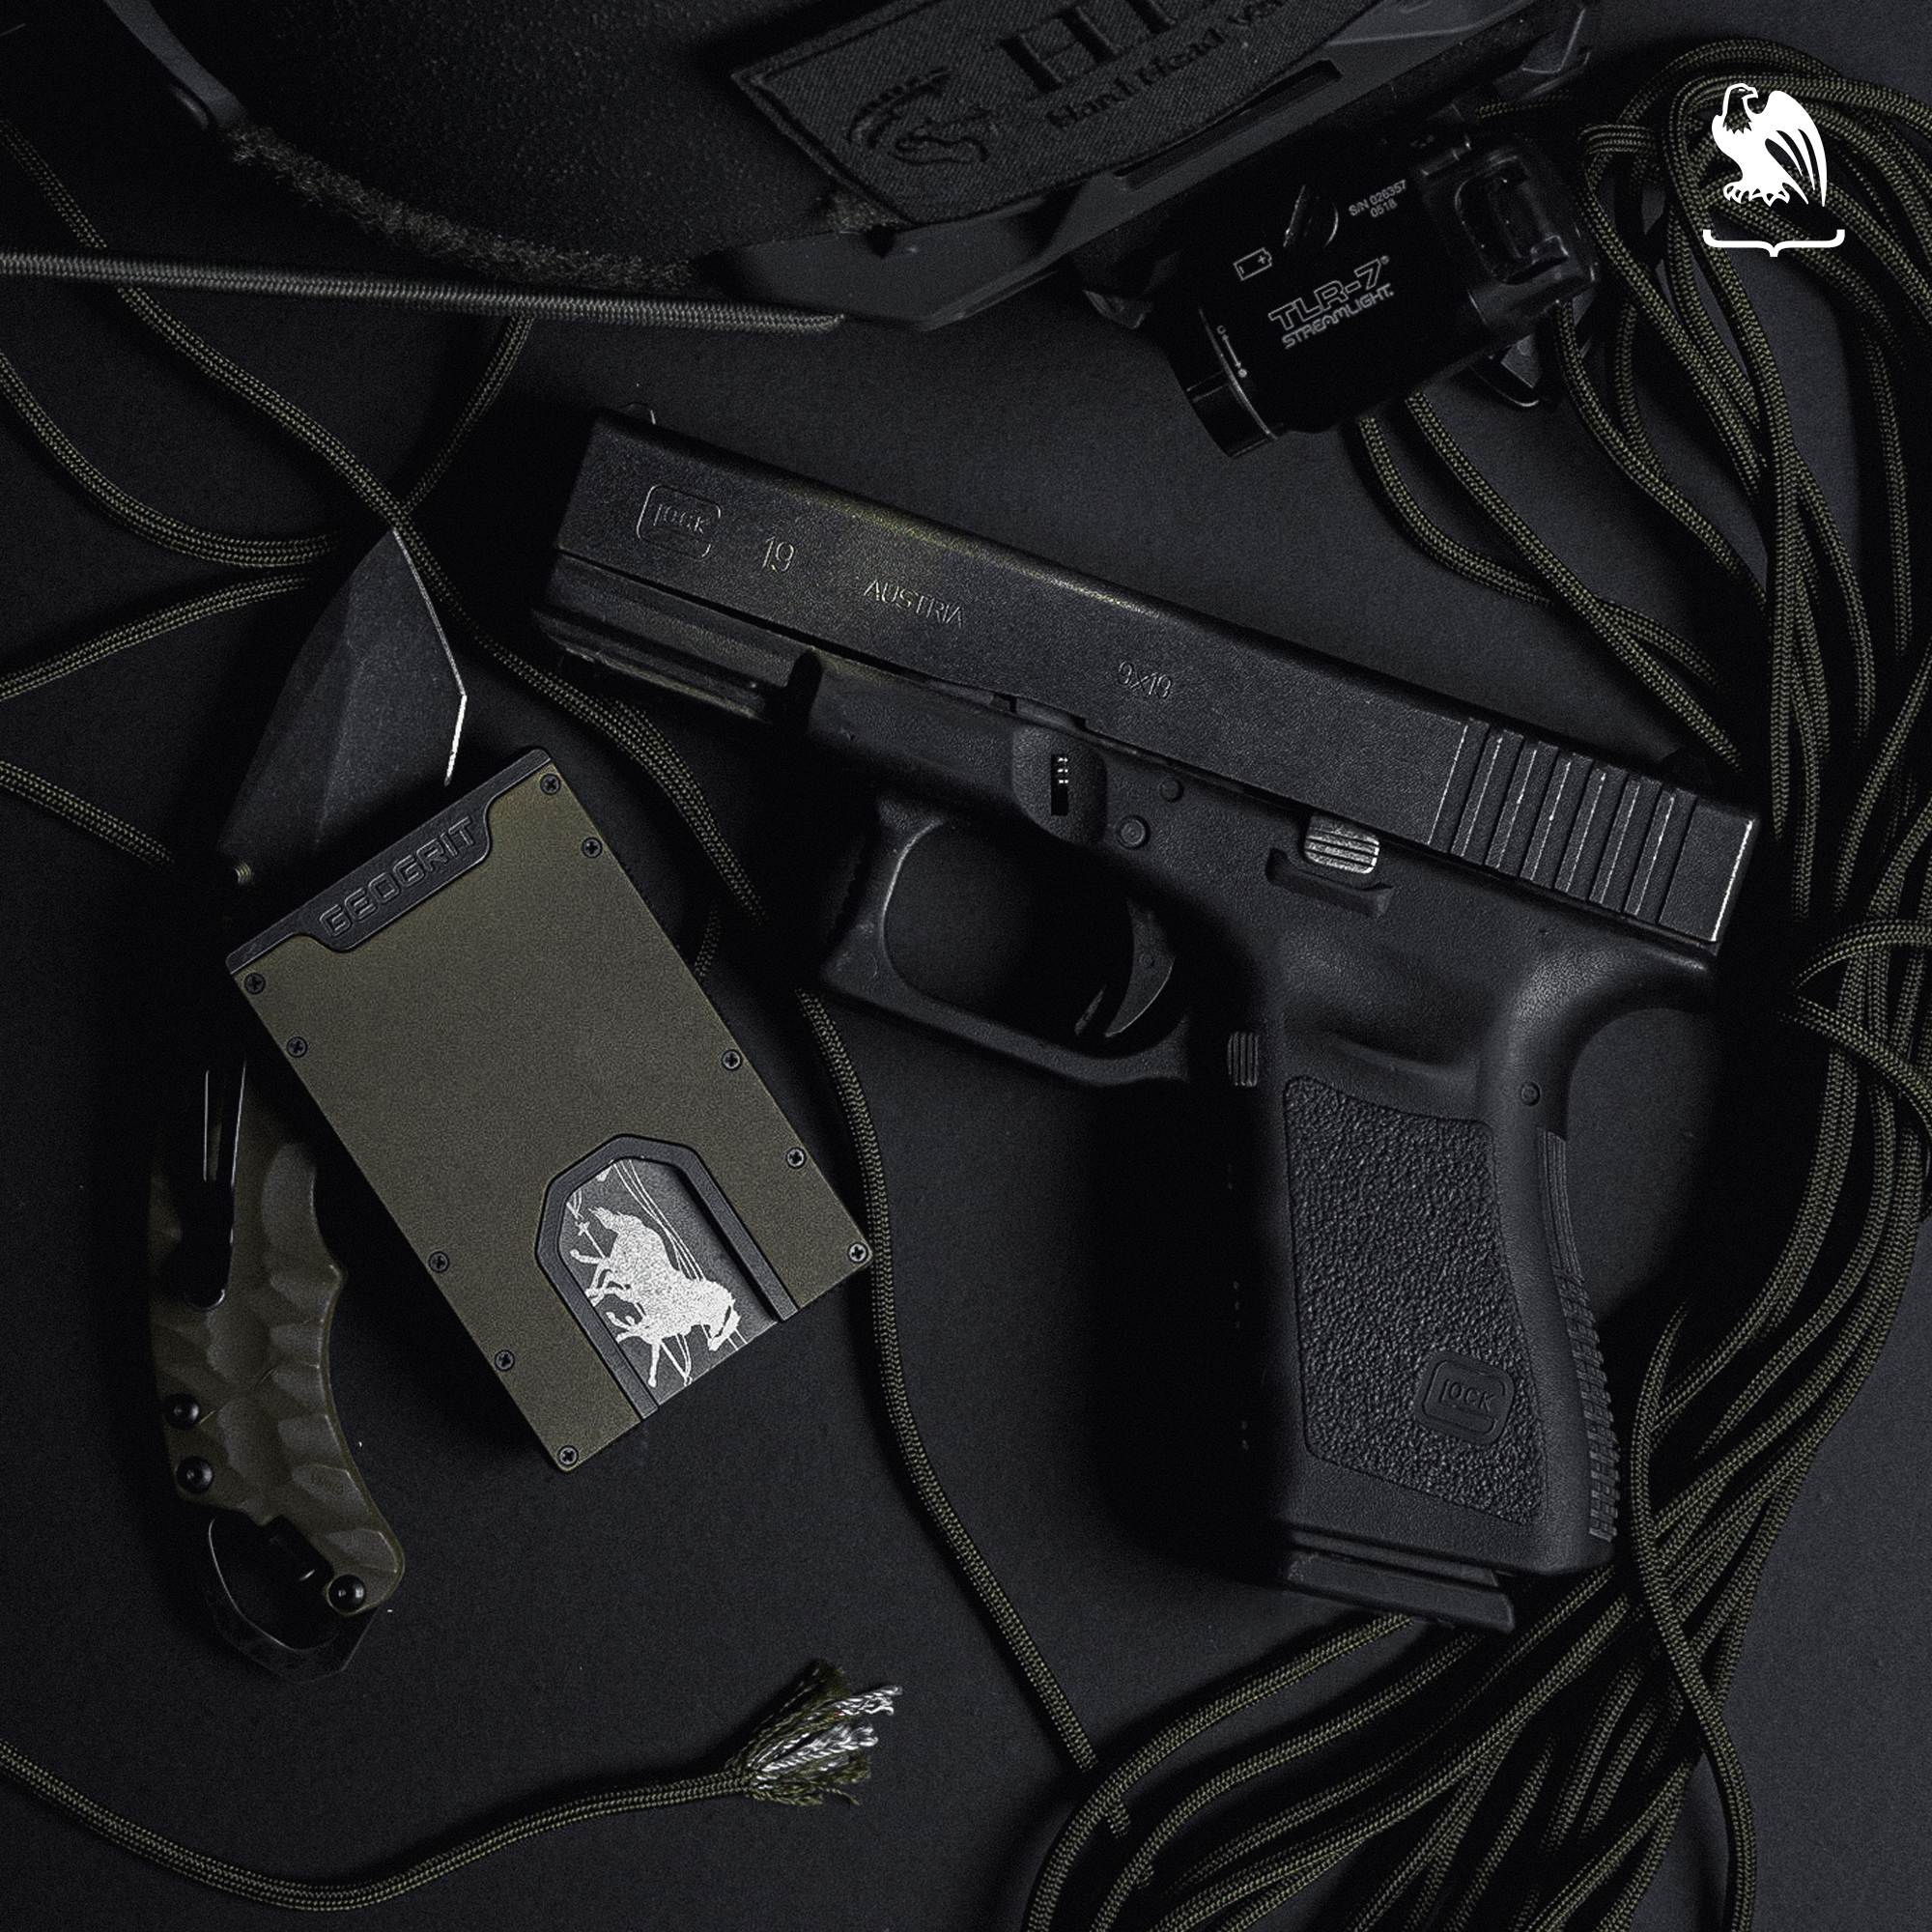 Glock 19 laying on black table next to a slim wallet and other tactical items